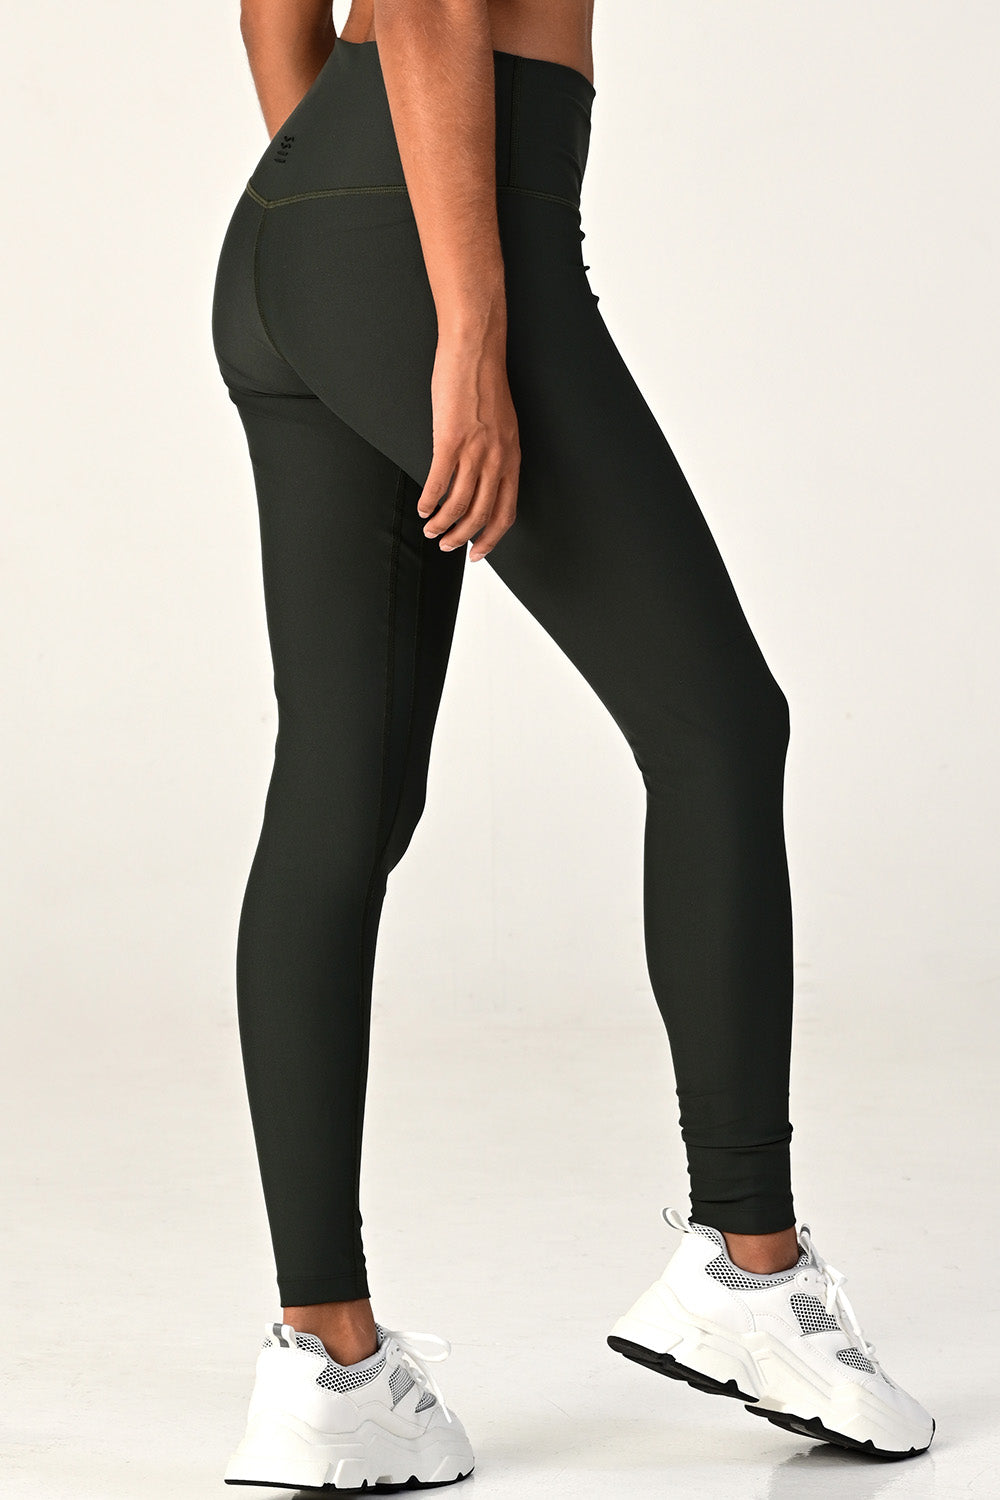 Side view of a woman posing wearing the soho olive active legging